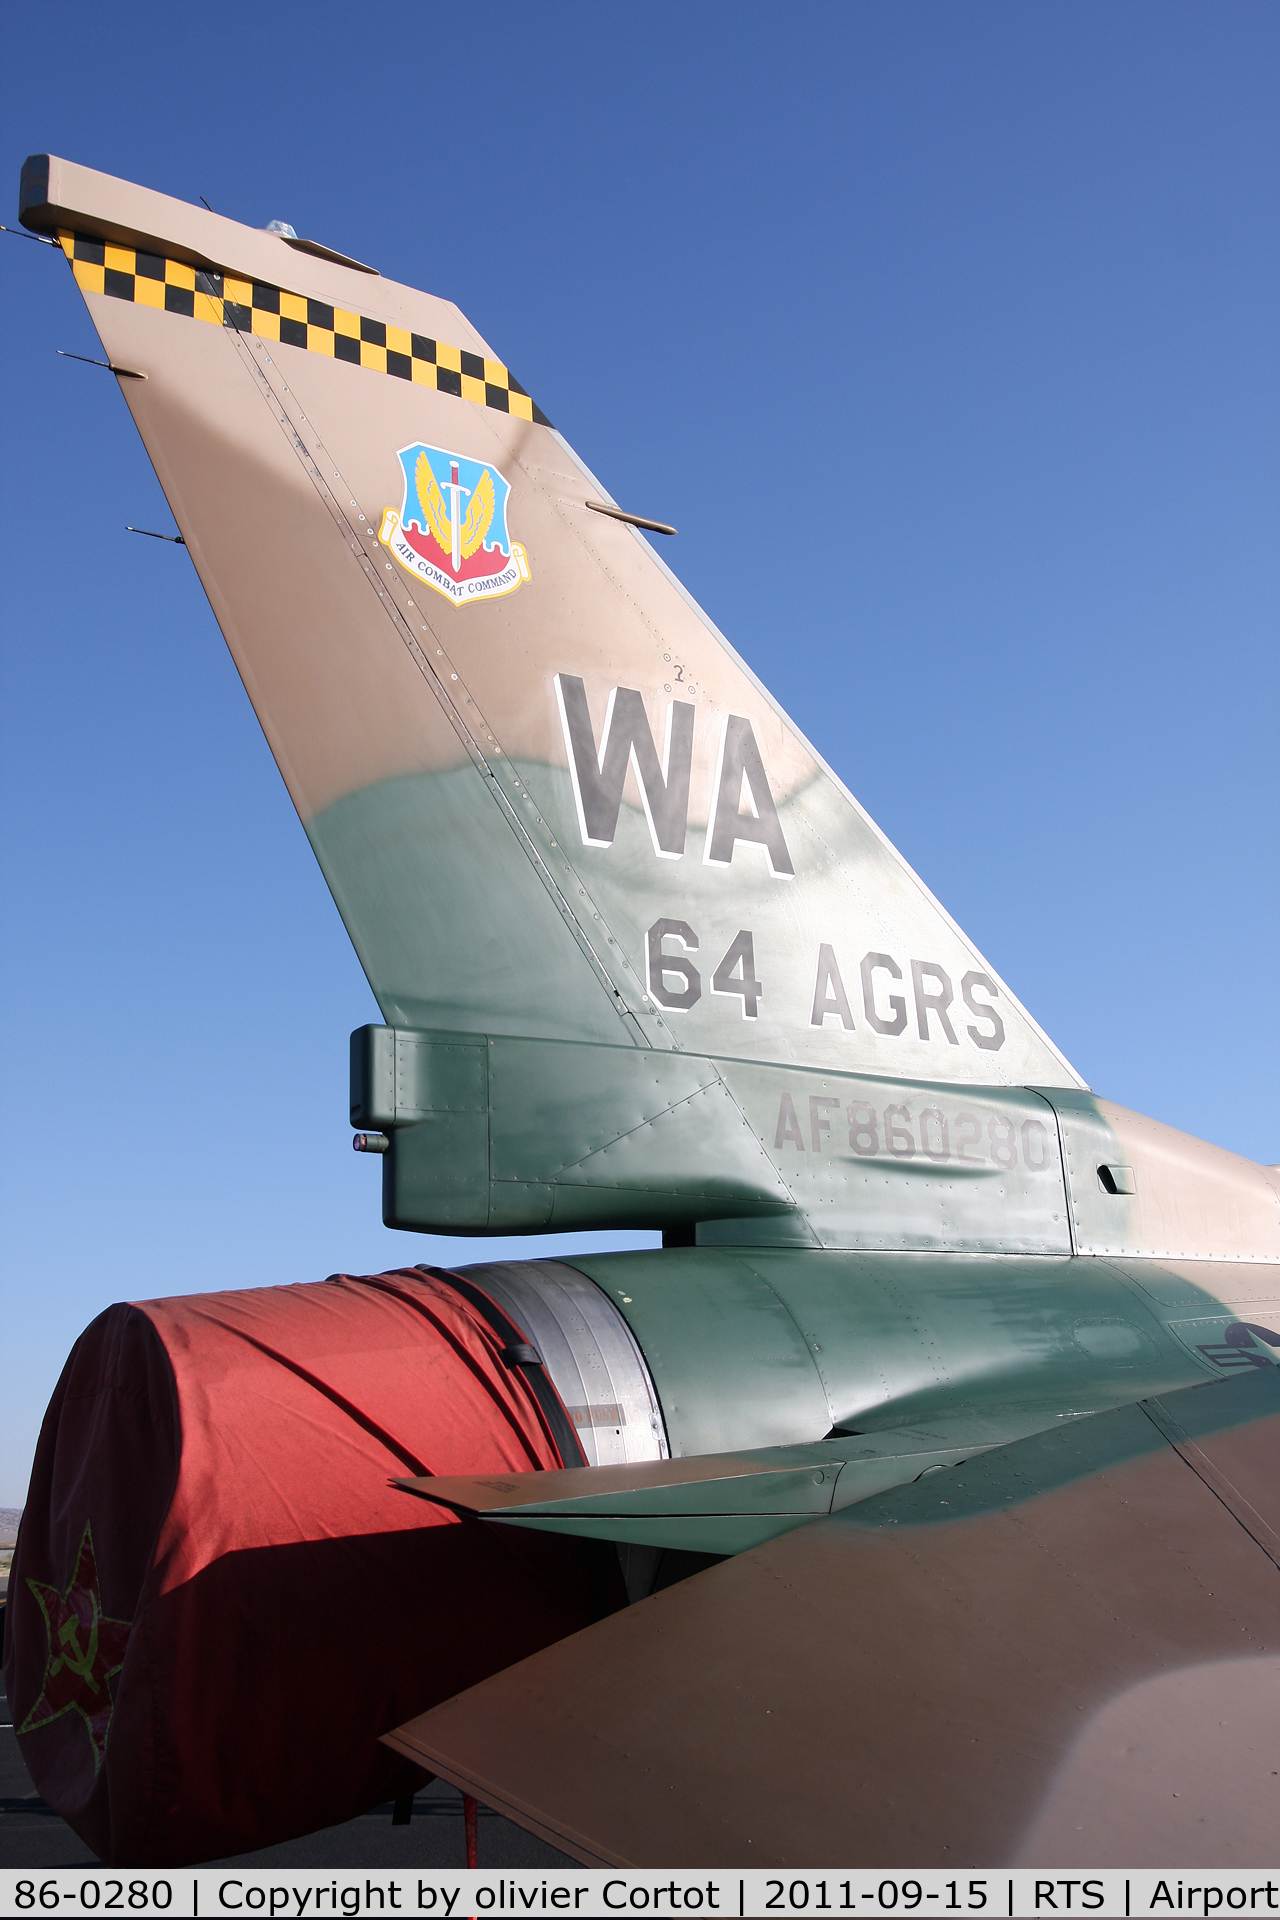 86-0280, 1986 General Dynamics F-16C Fighting Falcon C/N 5C-386, tail close-up